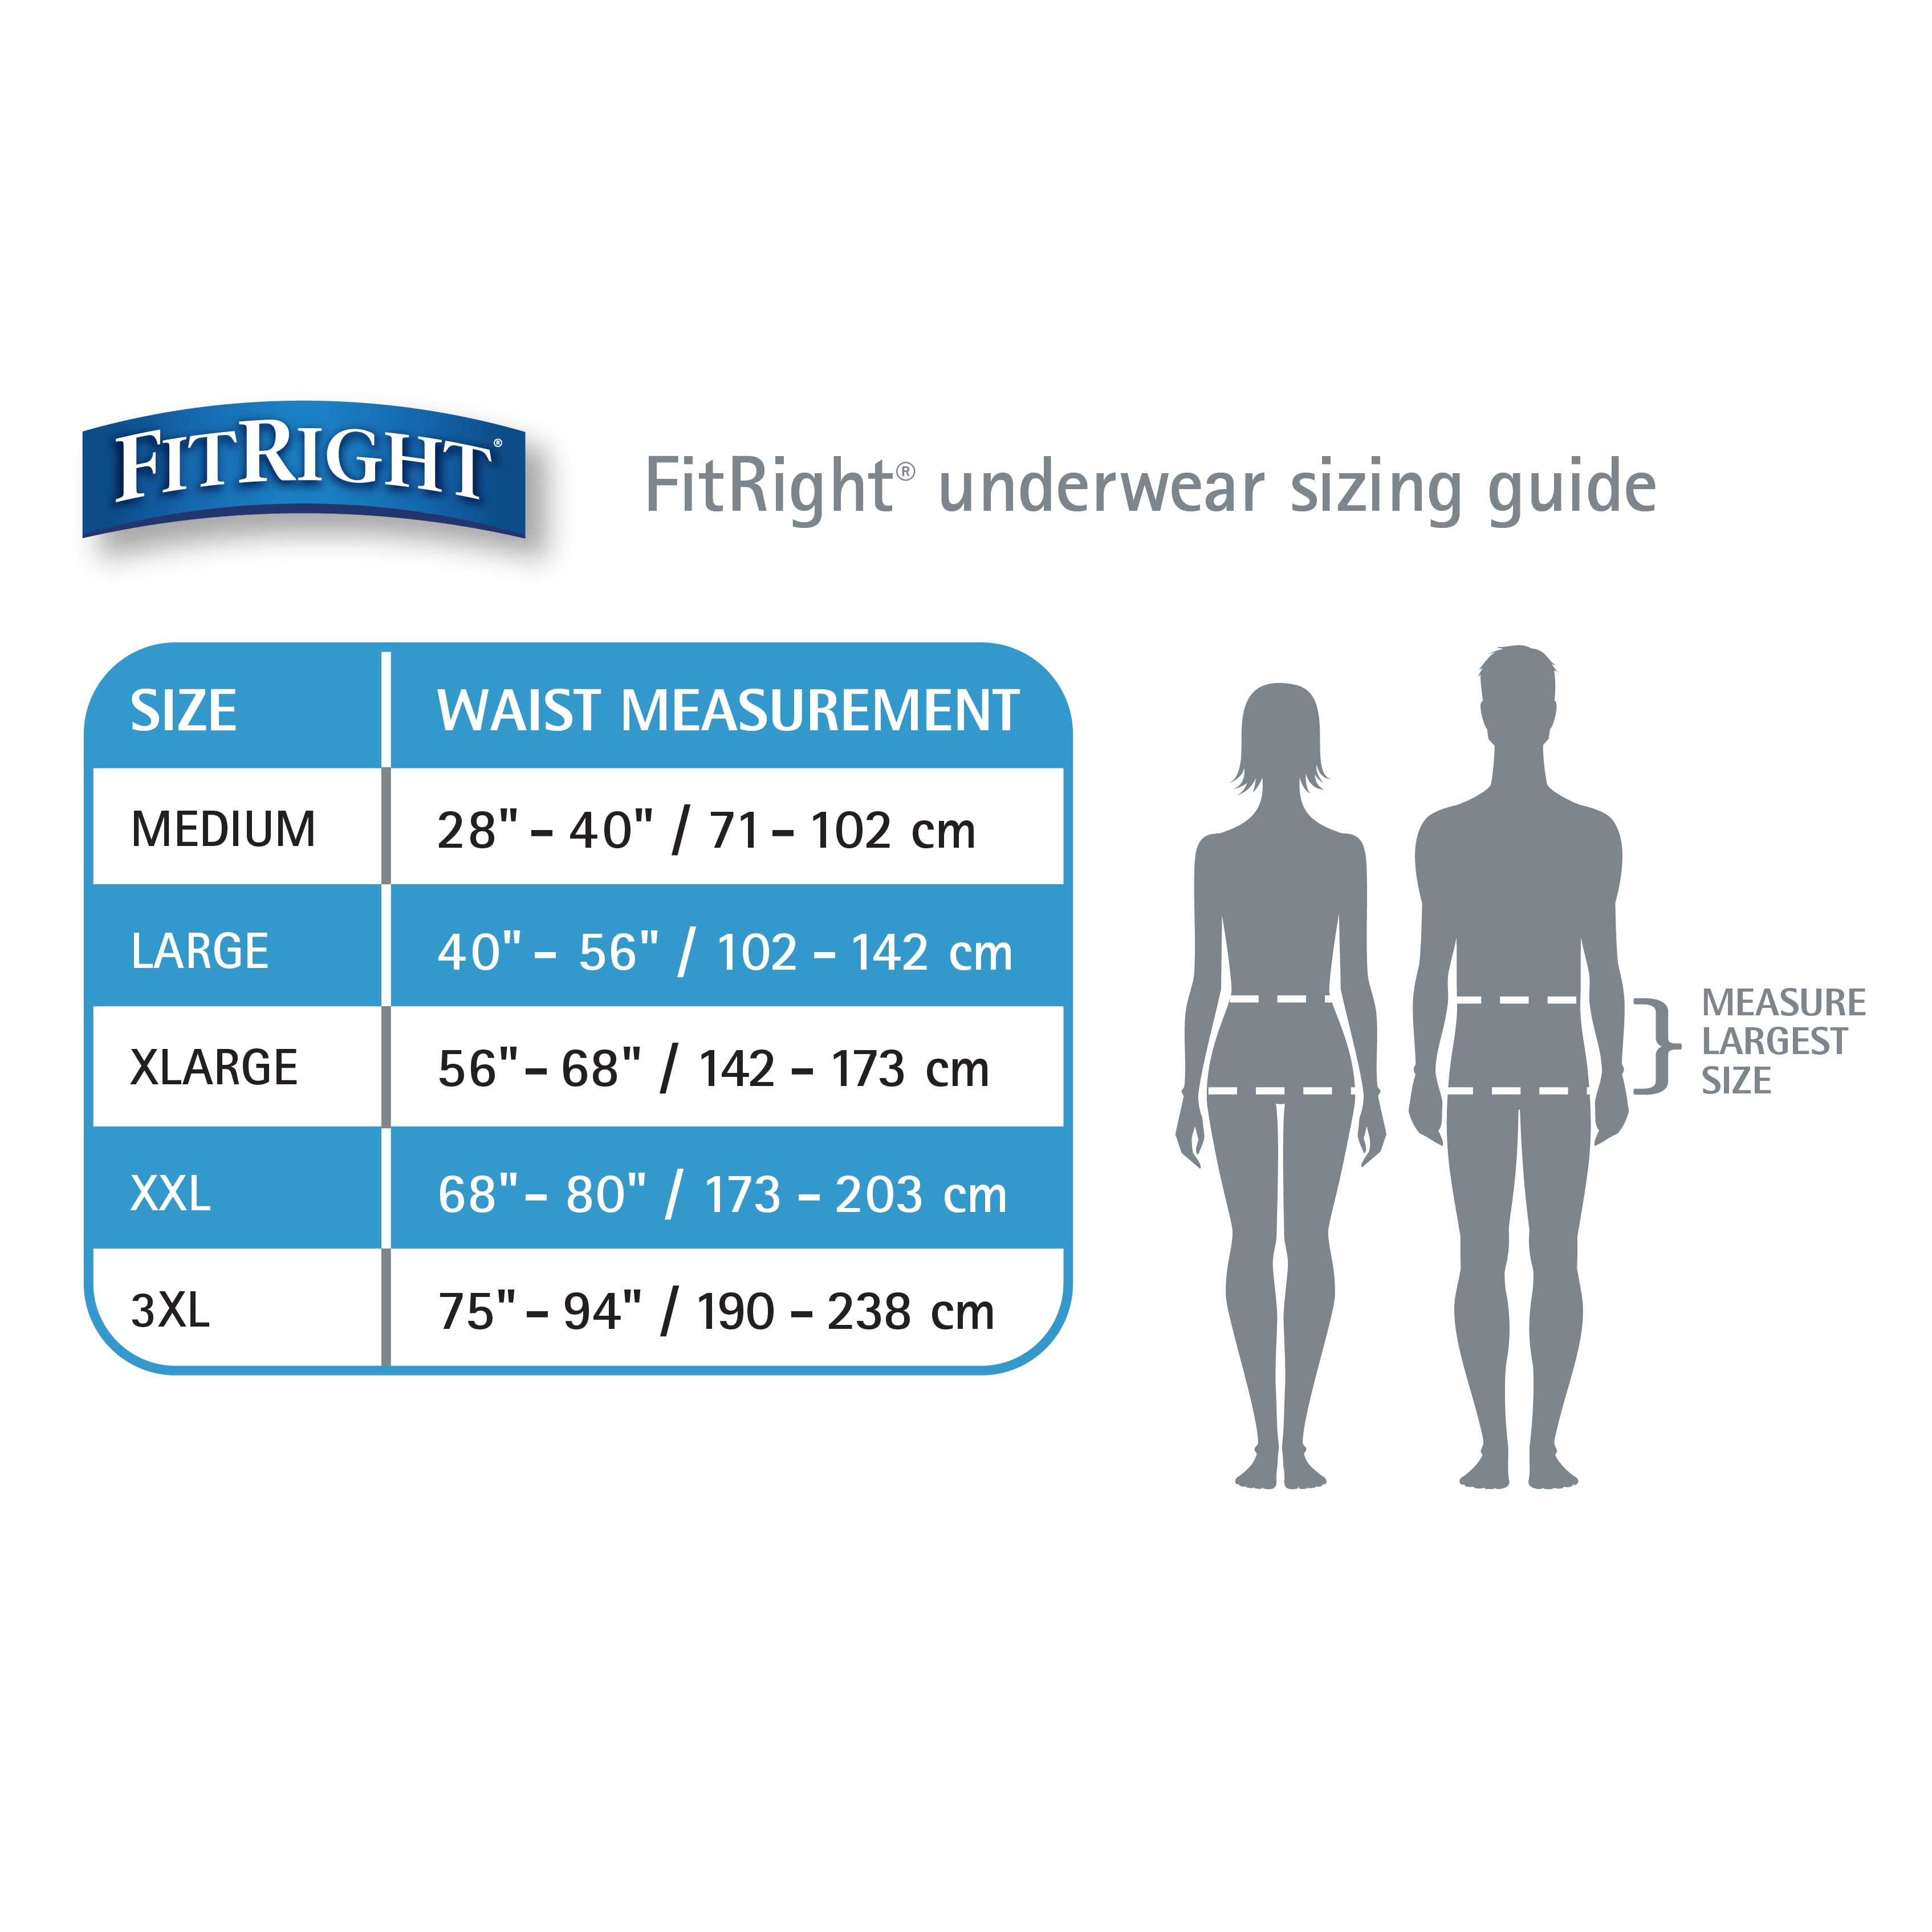 FitRight Adult Ultra Protective Underwear, 20 ct, Heavy Absorbency, Medium  28-40